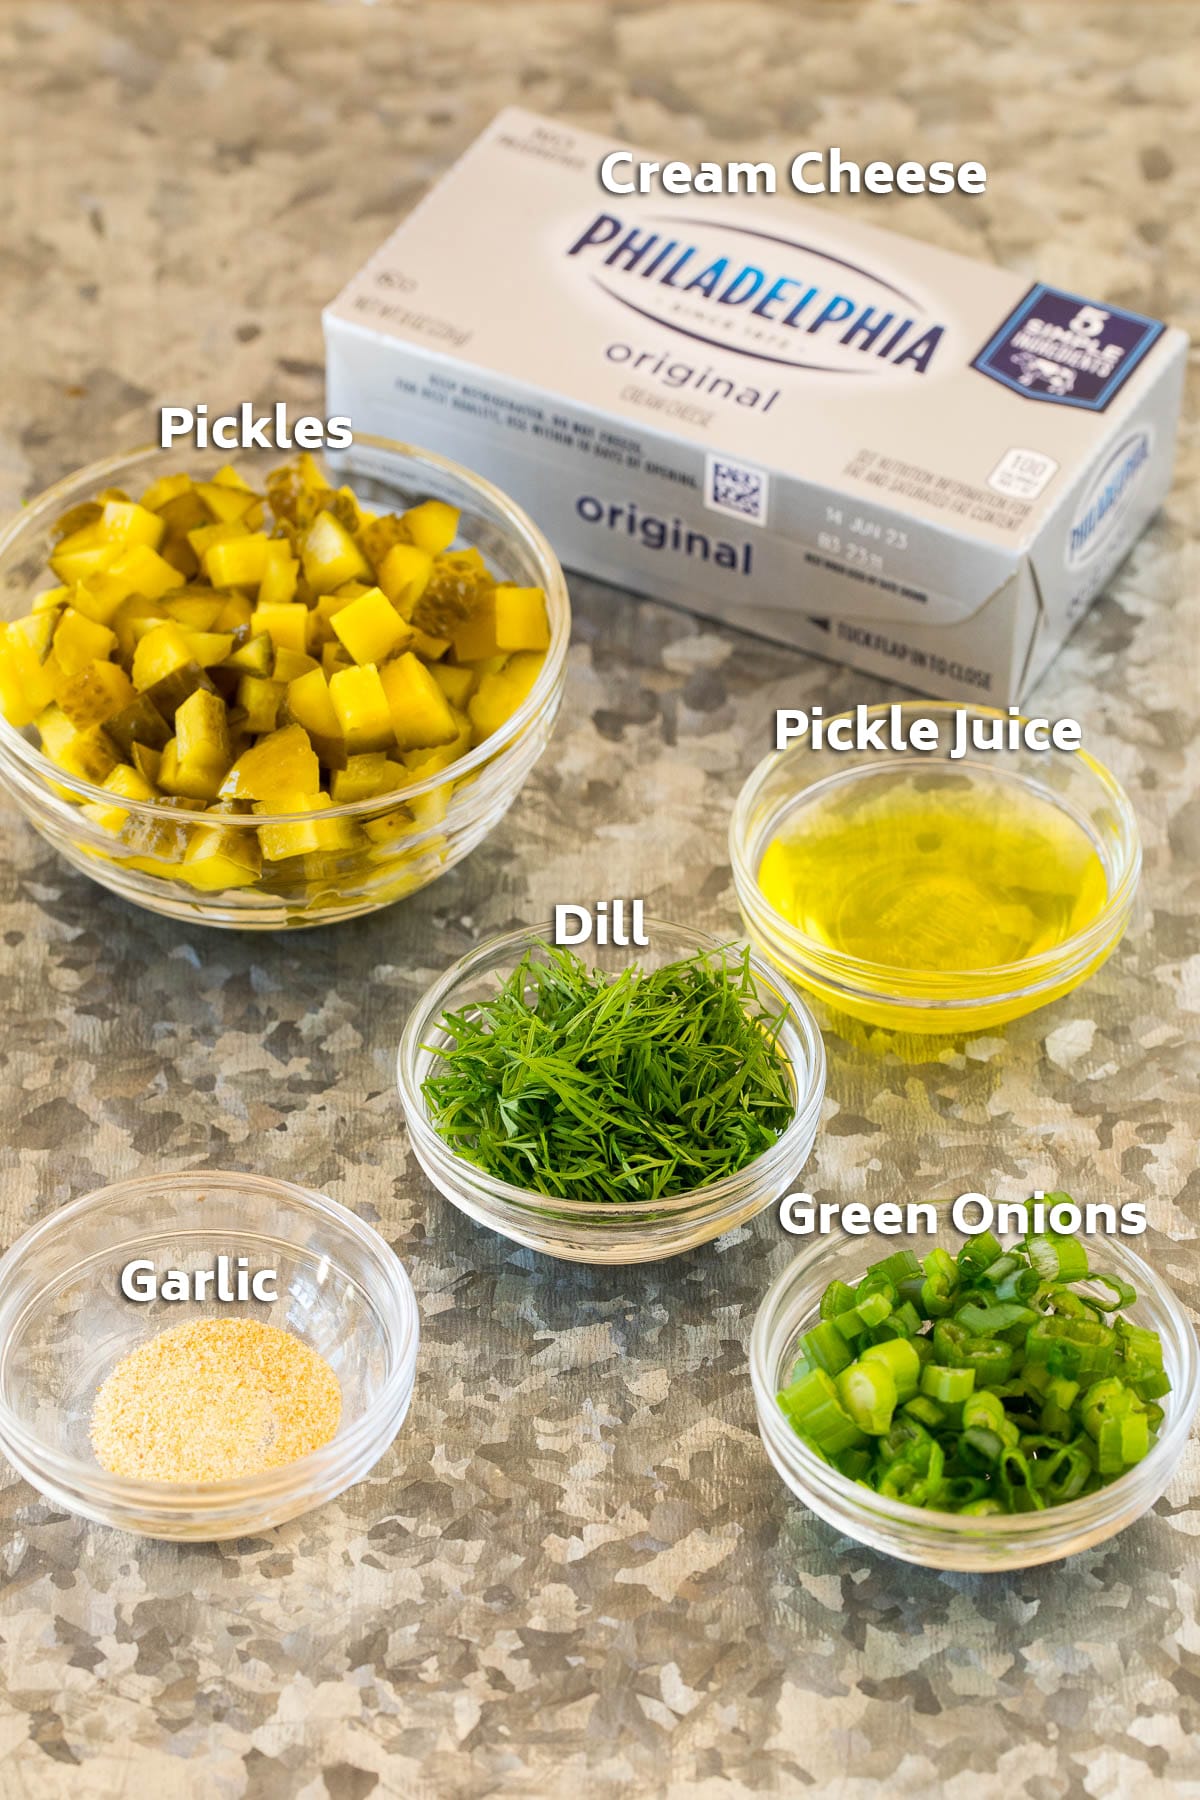 Ingredients including cream cheese, pickles, herbs and spices.